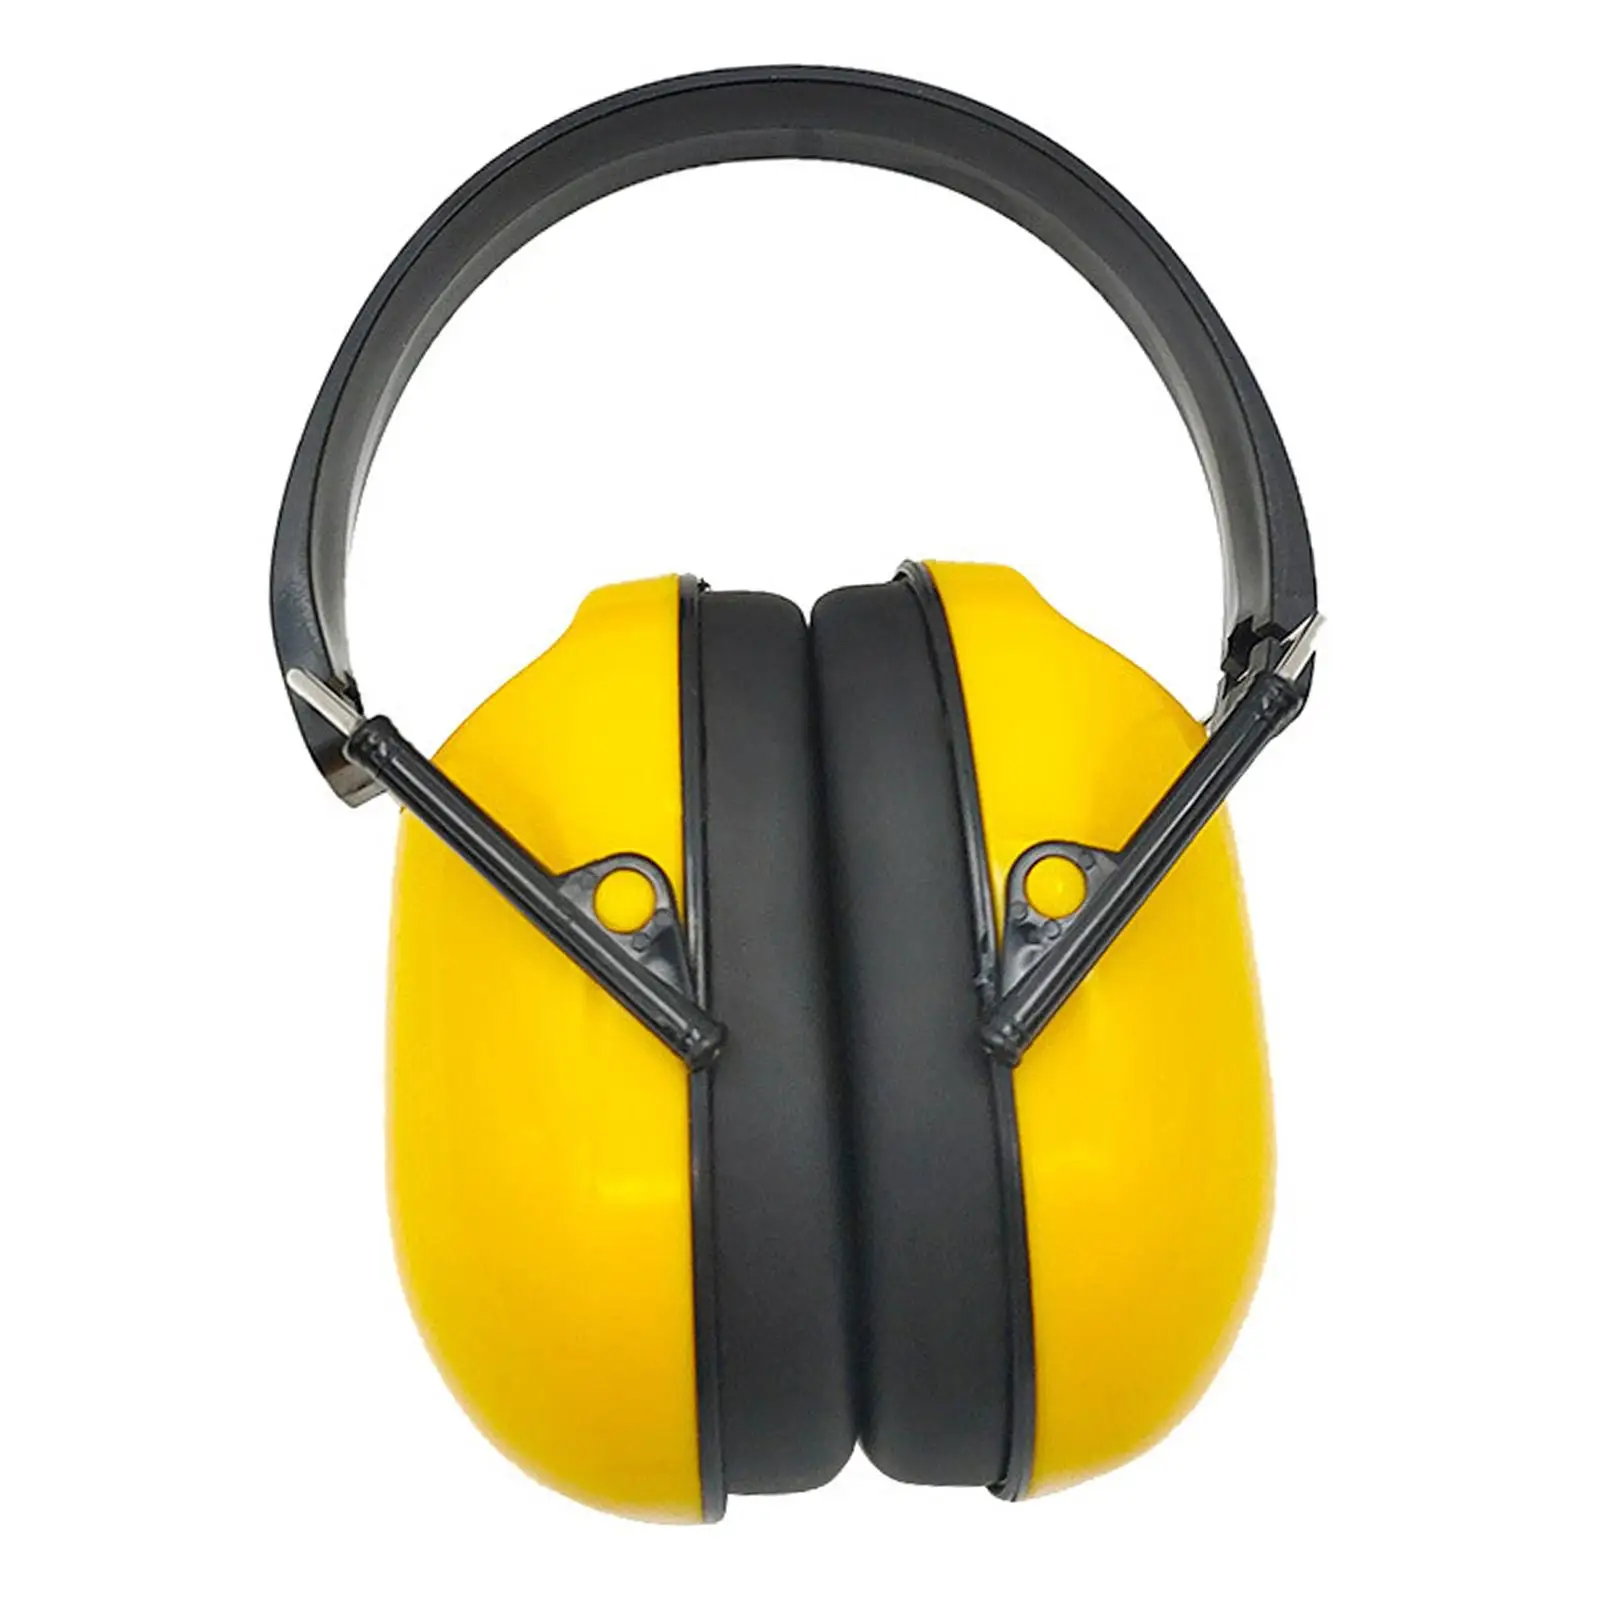 Ear Muffs Hearing Protection Noise Reduction Headband Ear Defenders for Airports Sports Events Loud Wedding